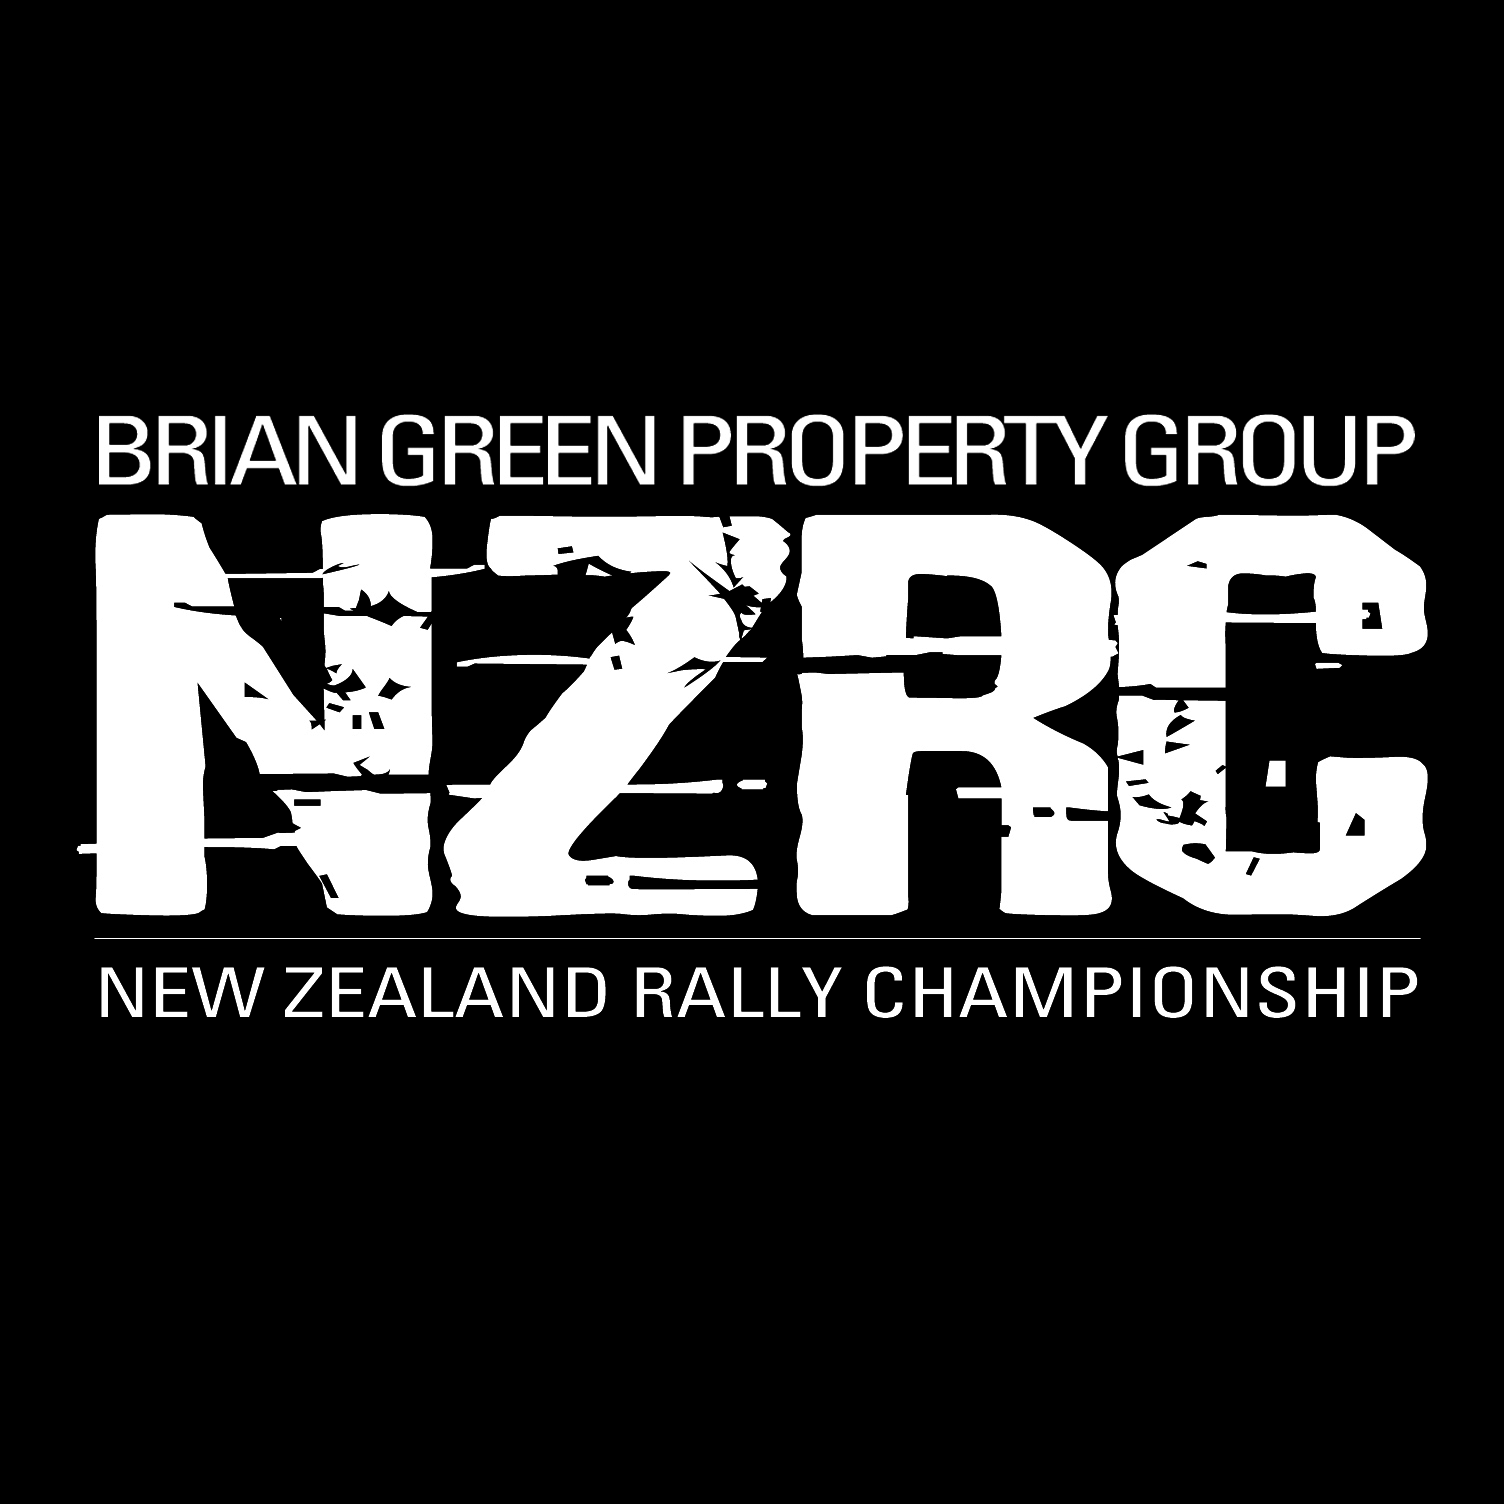 Hunt storms home to win in Otago | :: Brian Green Property Group New Zealand Rally Championship ::